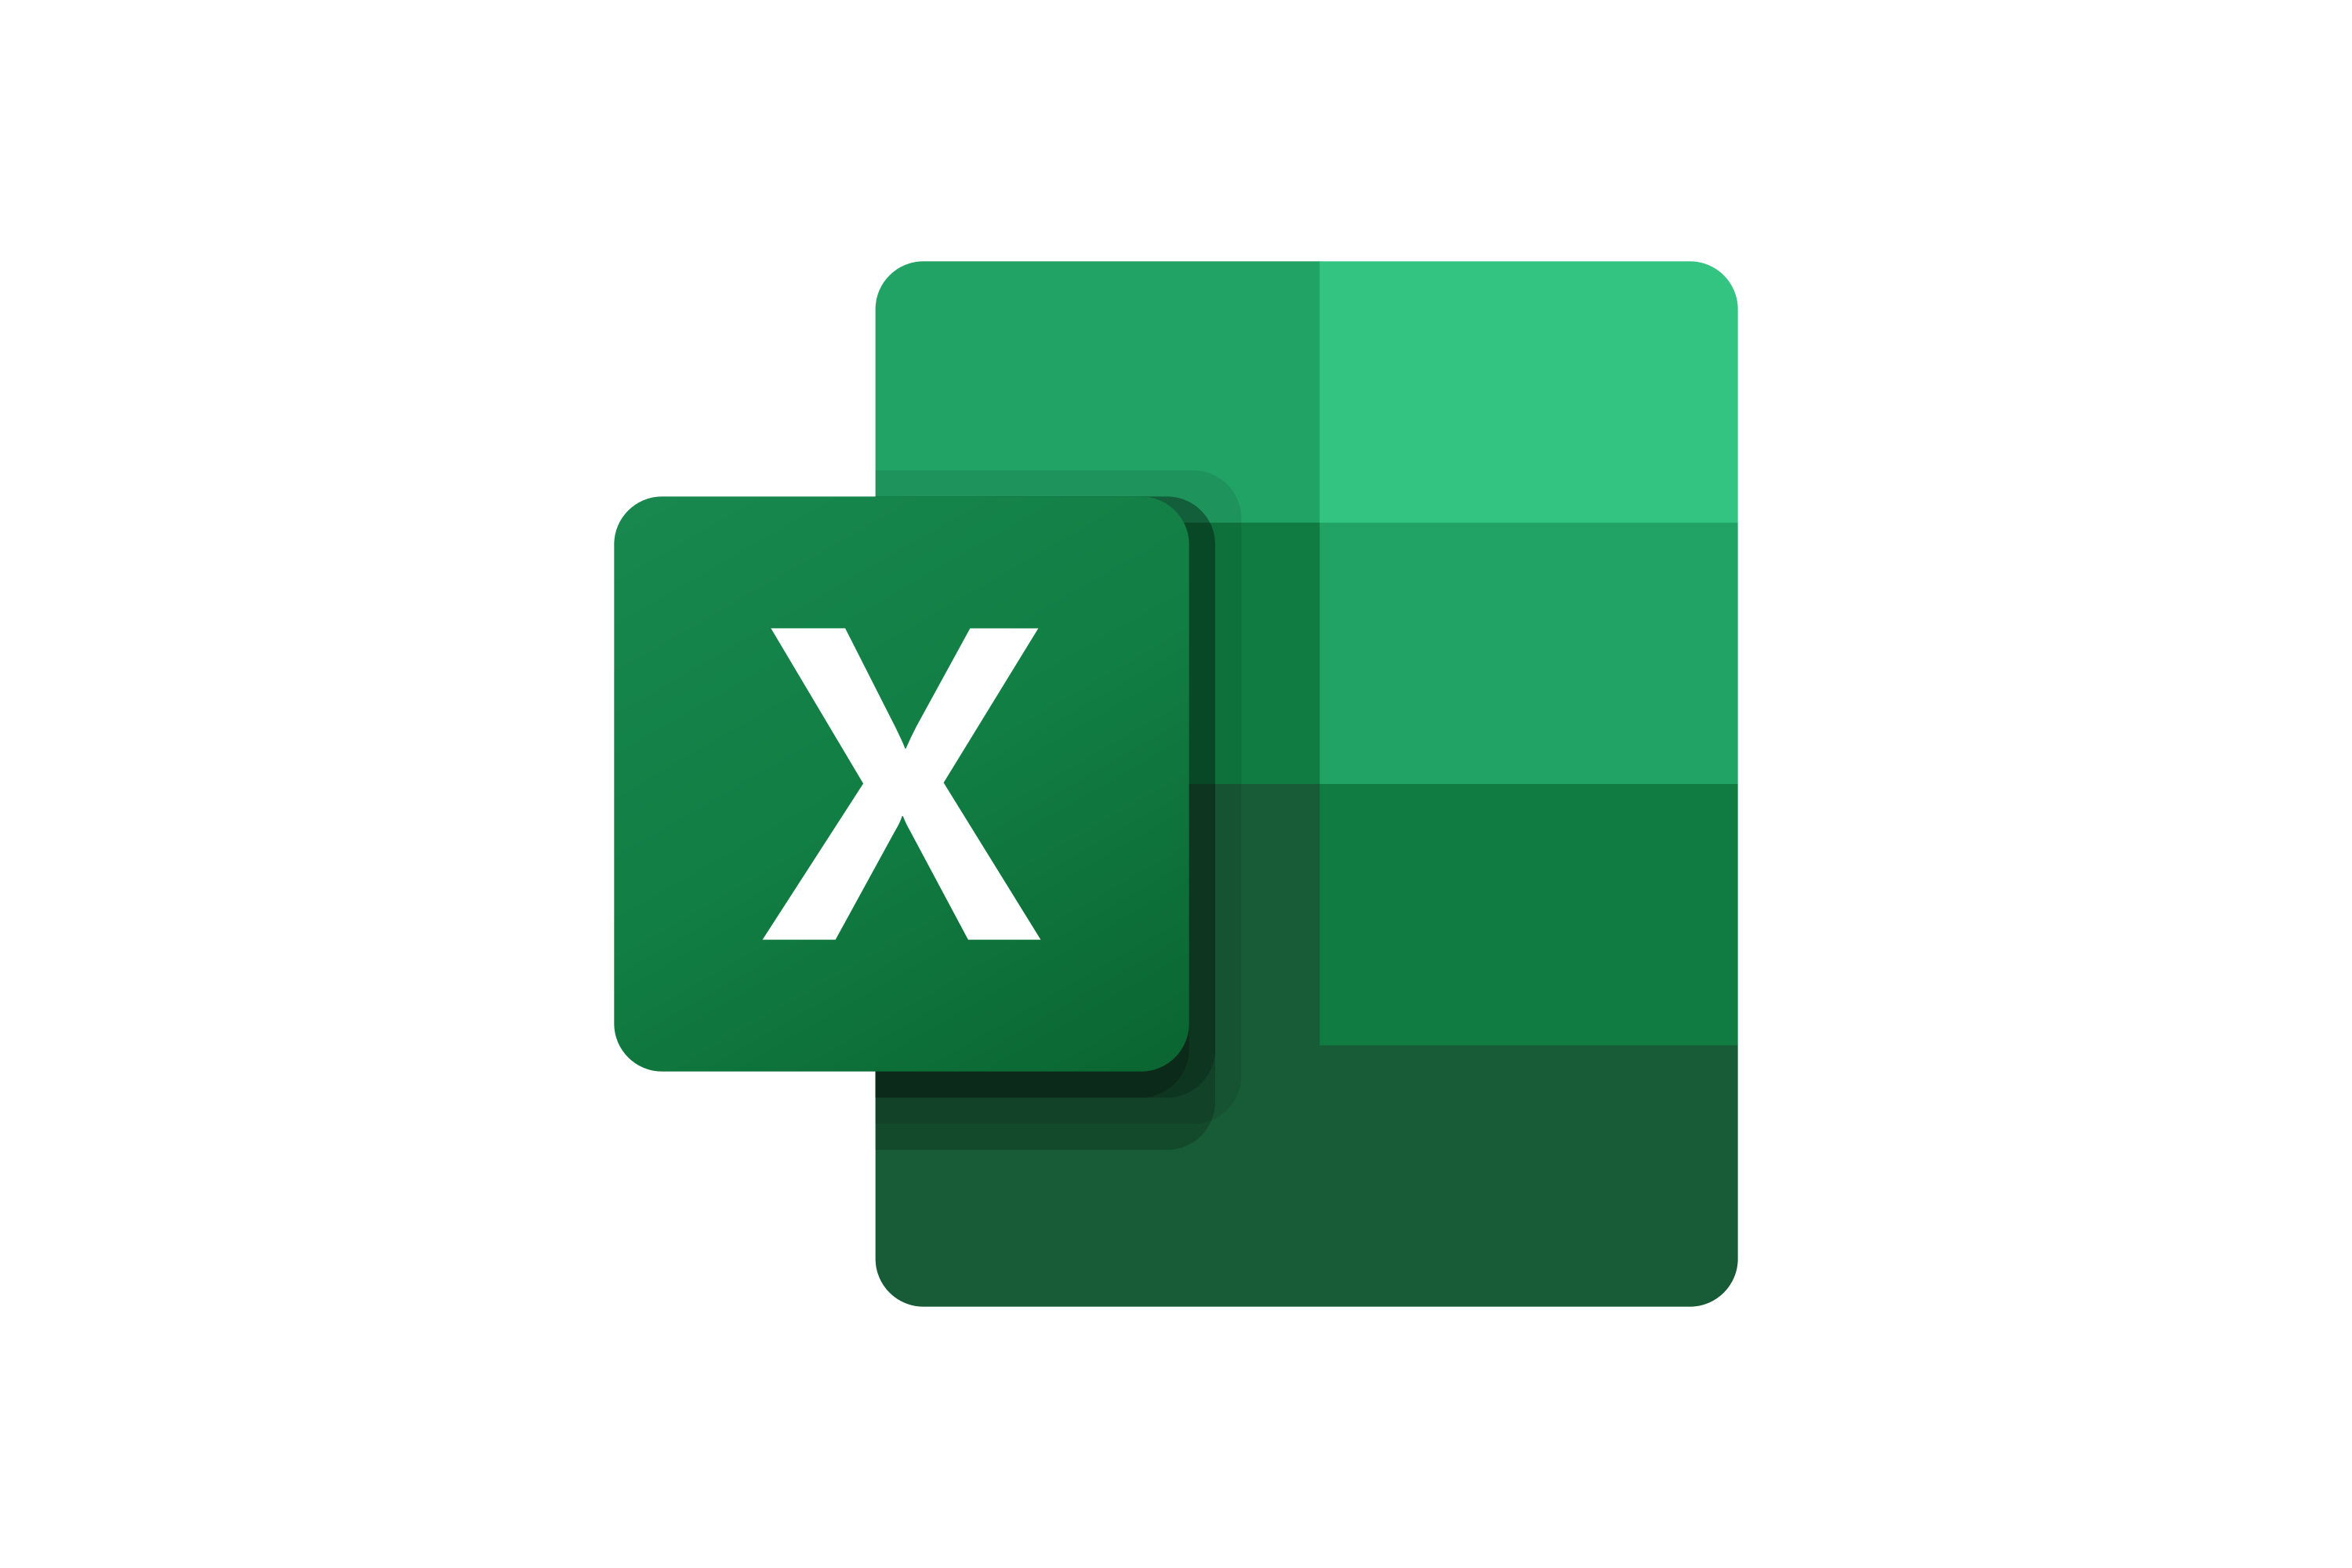 Microsoft Excel Png & Fre